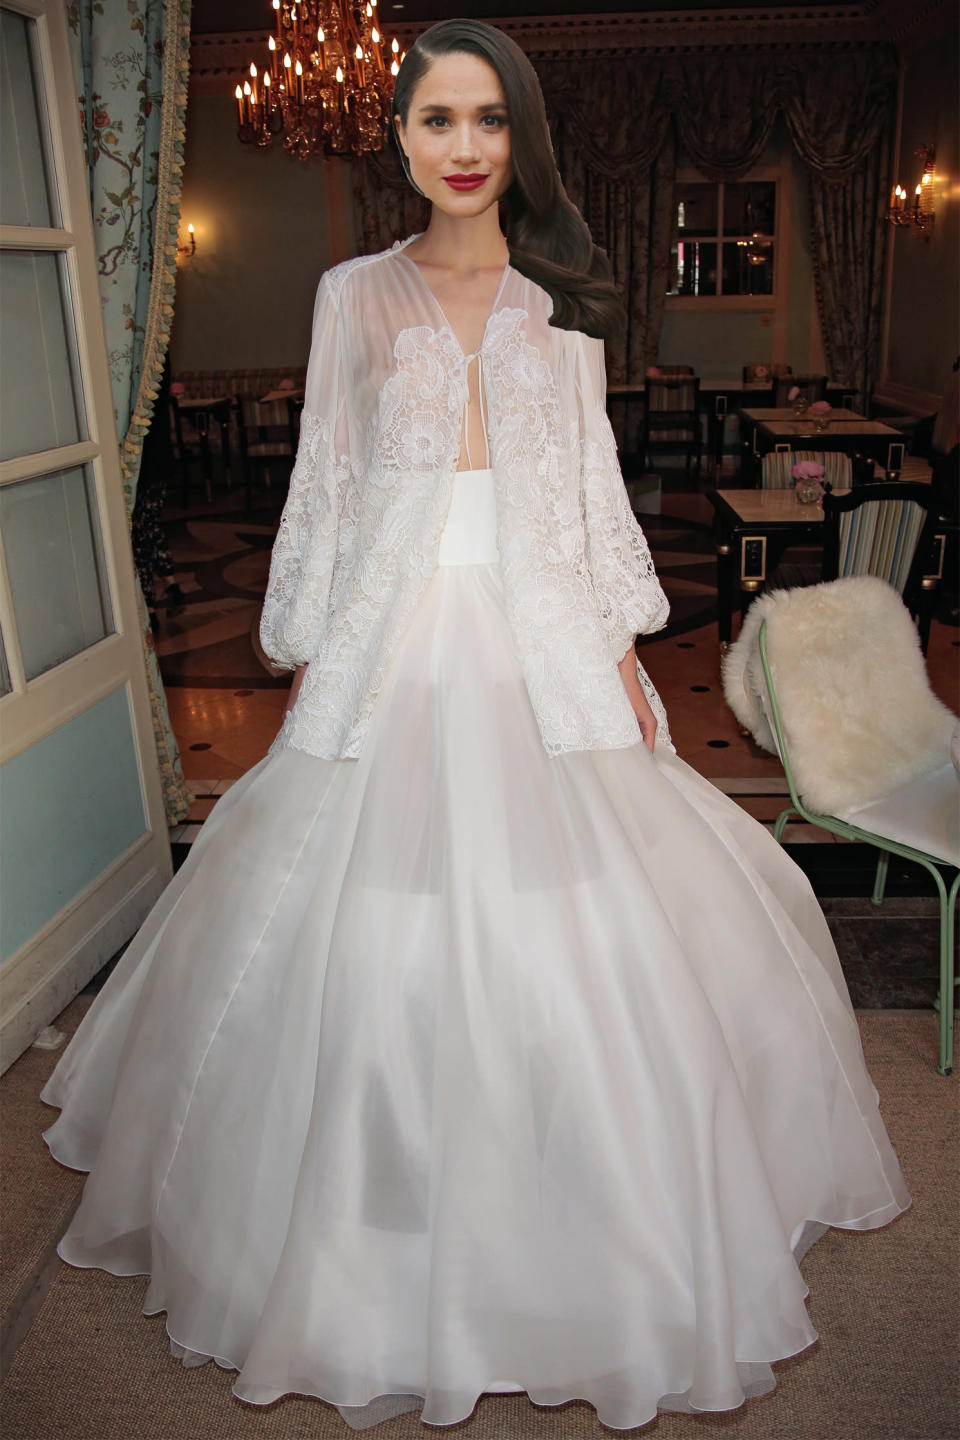 <p>Paris-based designer Delphine Manivet is a favourite of Meghan’s with the star saying the under-the-radar label’s whimsical romantic dresses <a rel="nofollow noopener" href="https://www.glamour.com/story/suits-wedding-dress-rachel-zane" target="_blank" data-ylk="slk:should be celebrated" class="link ">should be celebrated</a> “for their uniqueness and beauty.” <i>[Photo: Getty]</i> </p>